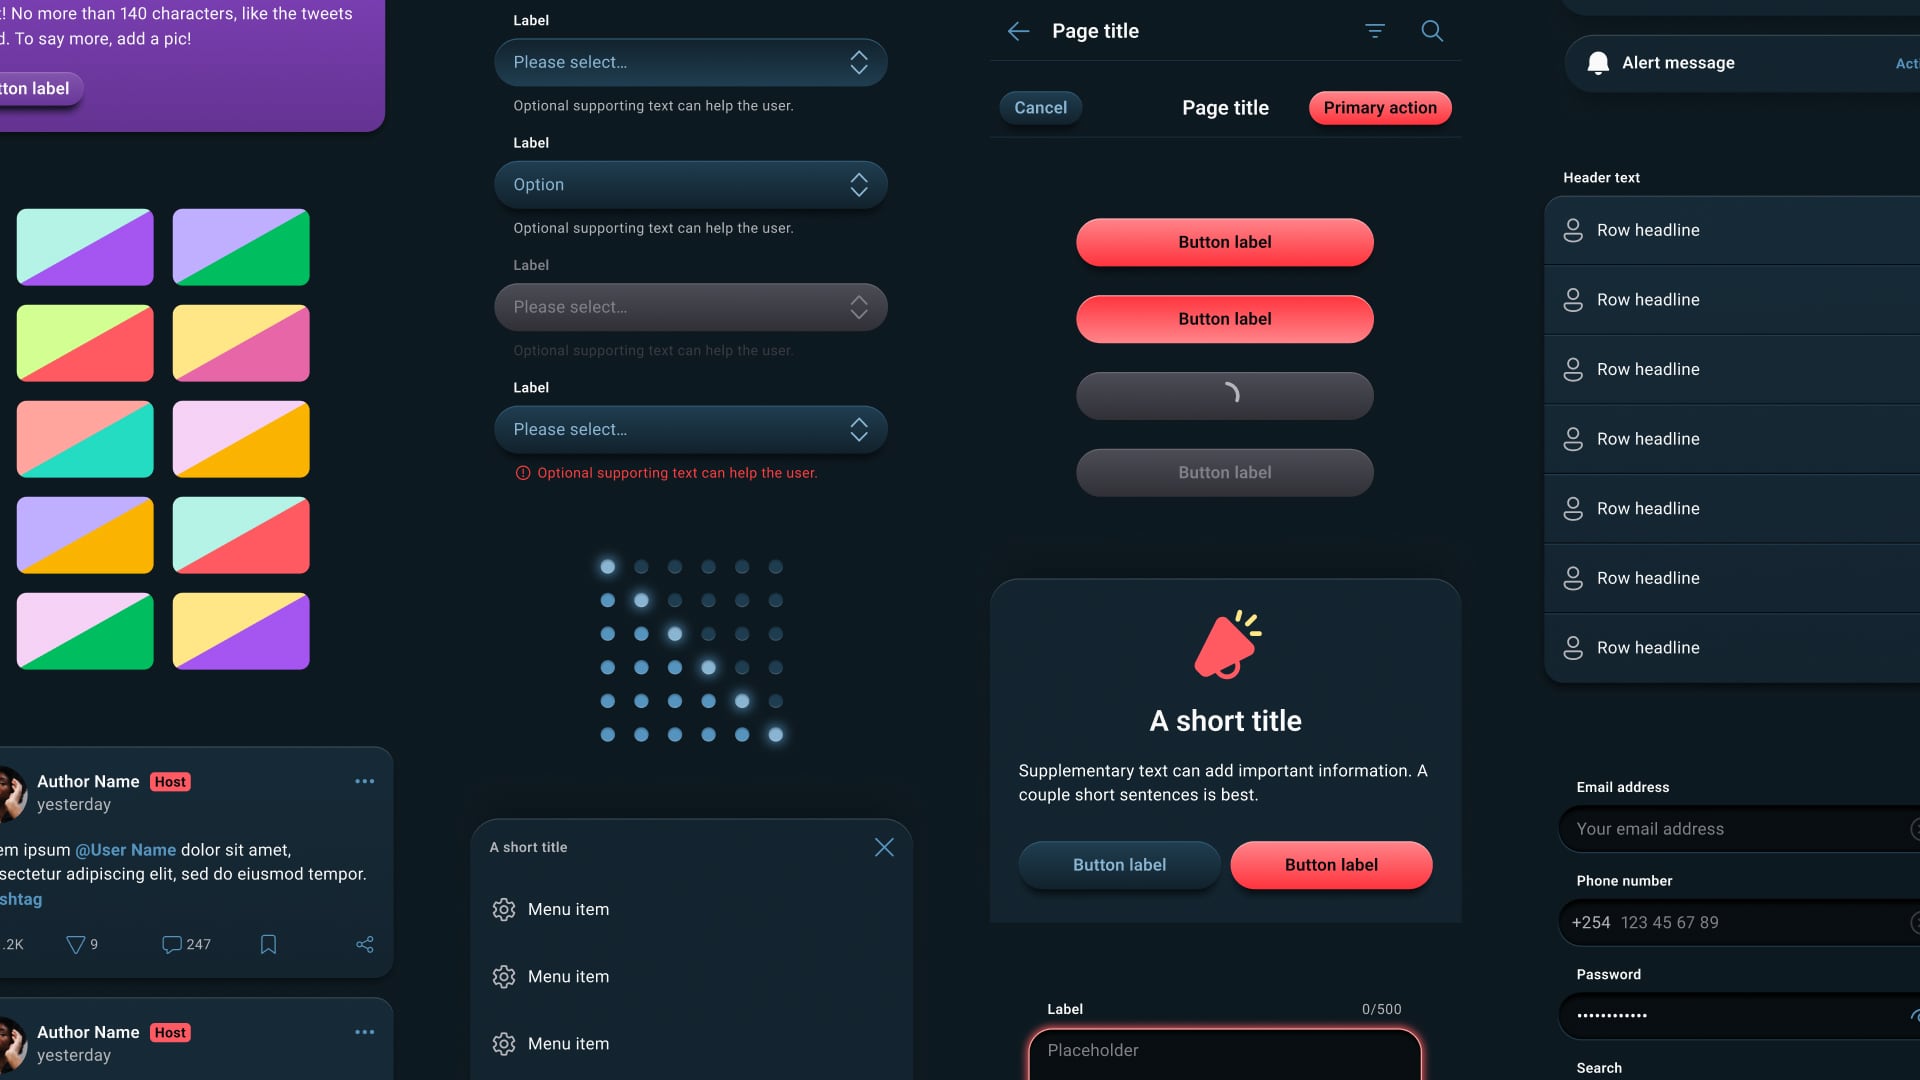 A collection of user interface elements from the MESH app, characterized by tactility - cards and buttons lifted off the page with subtle depth.